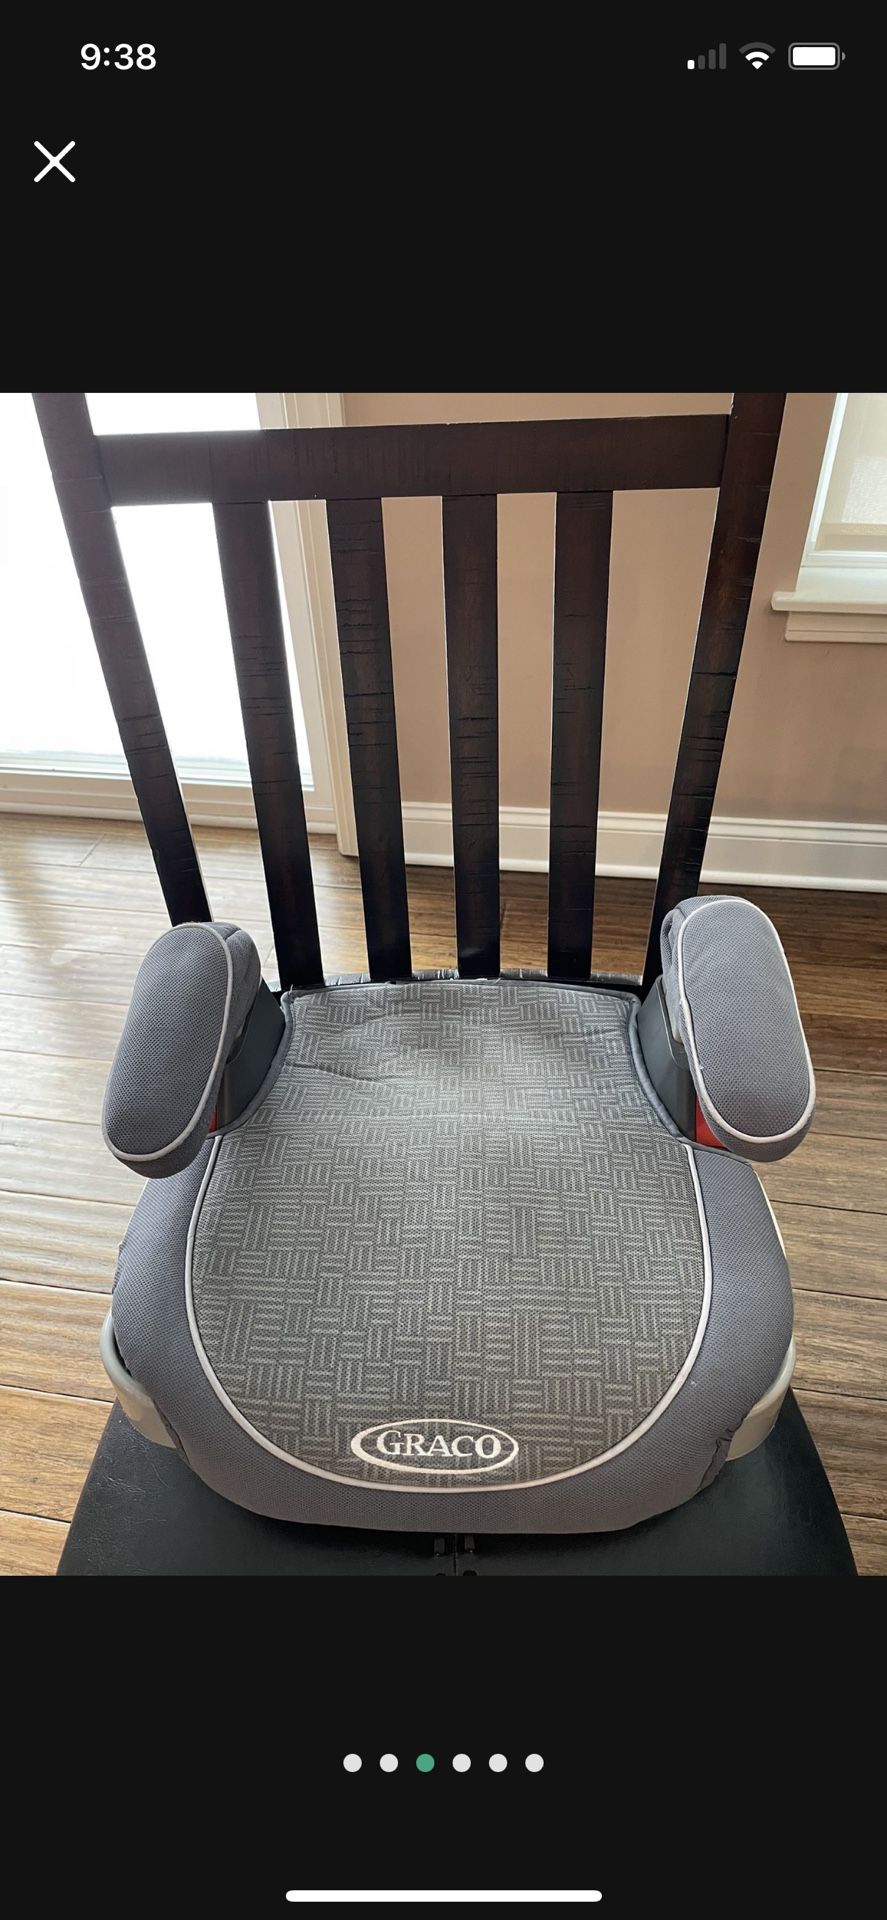 Graco Backless Booster car seat $7